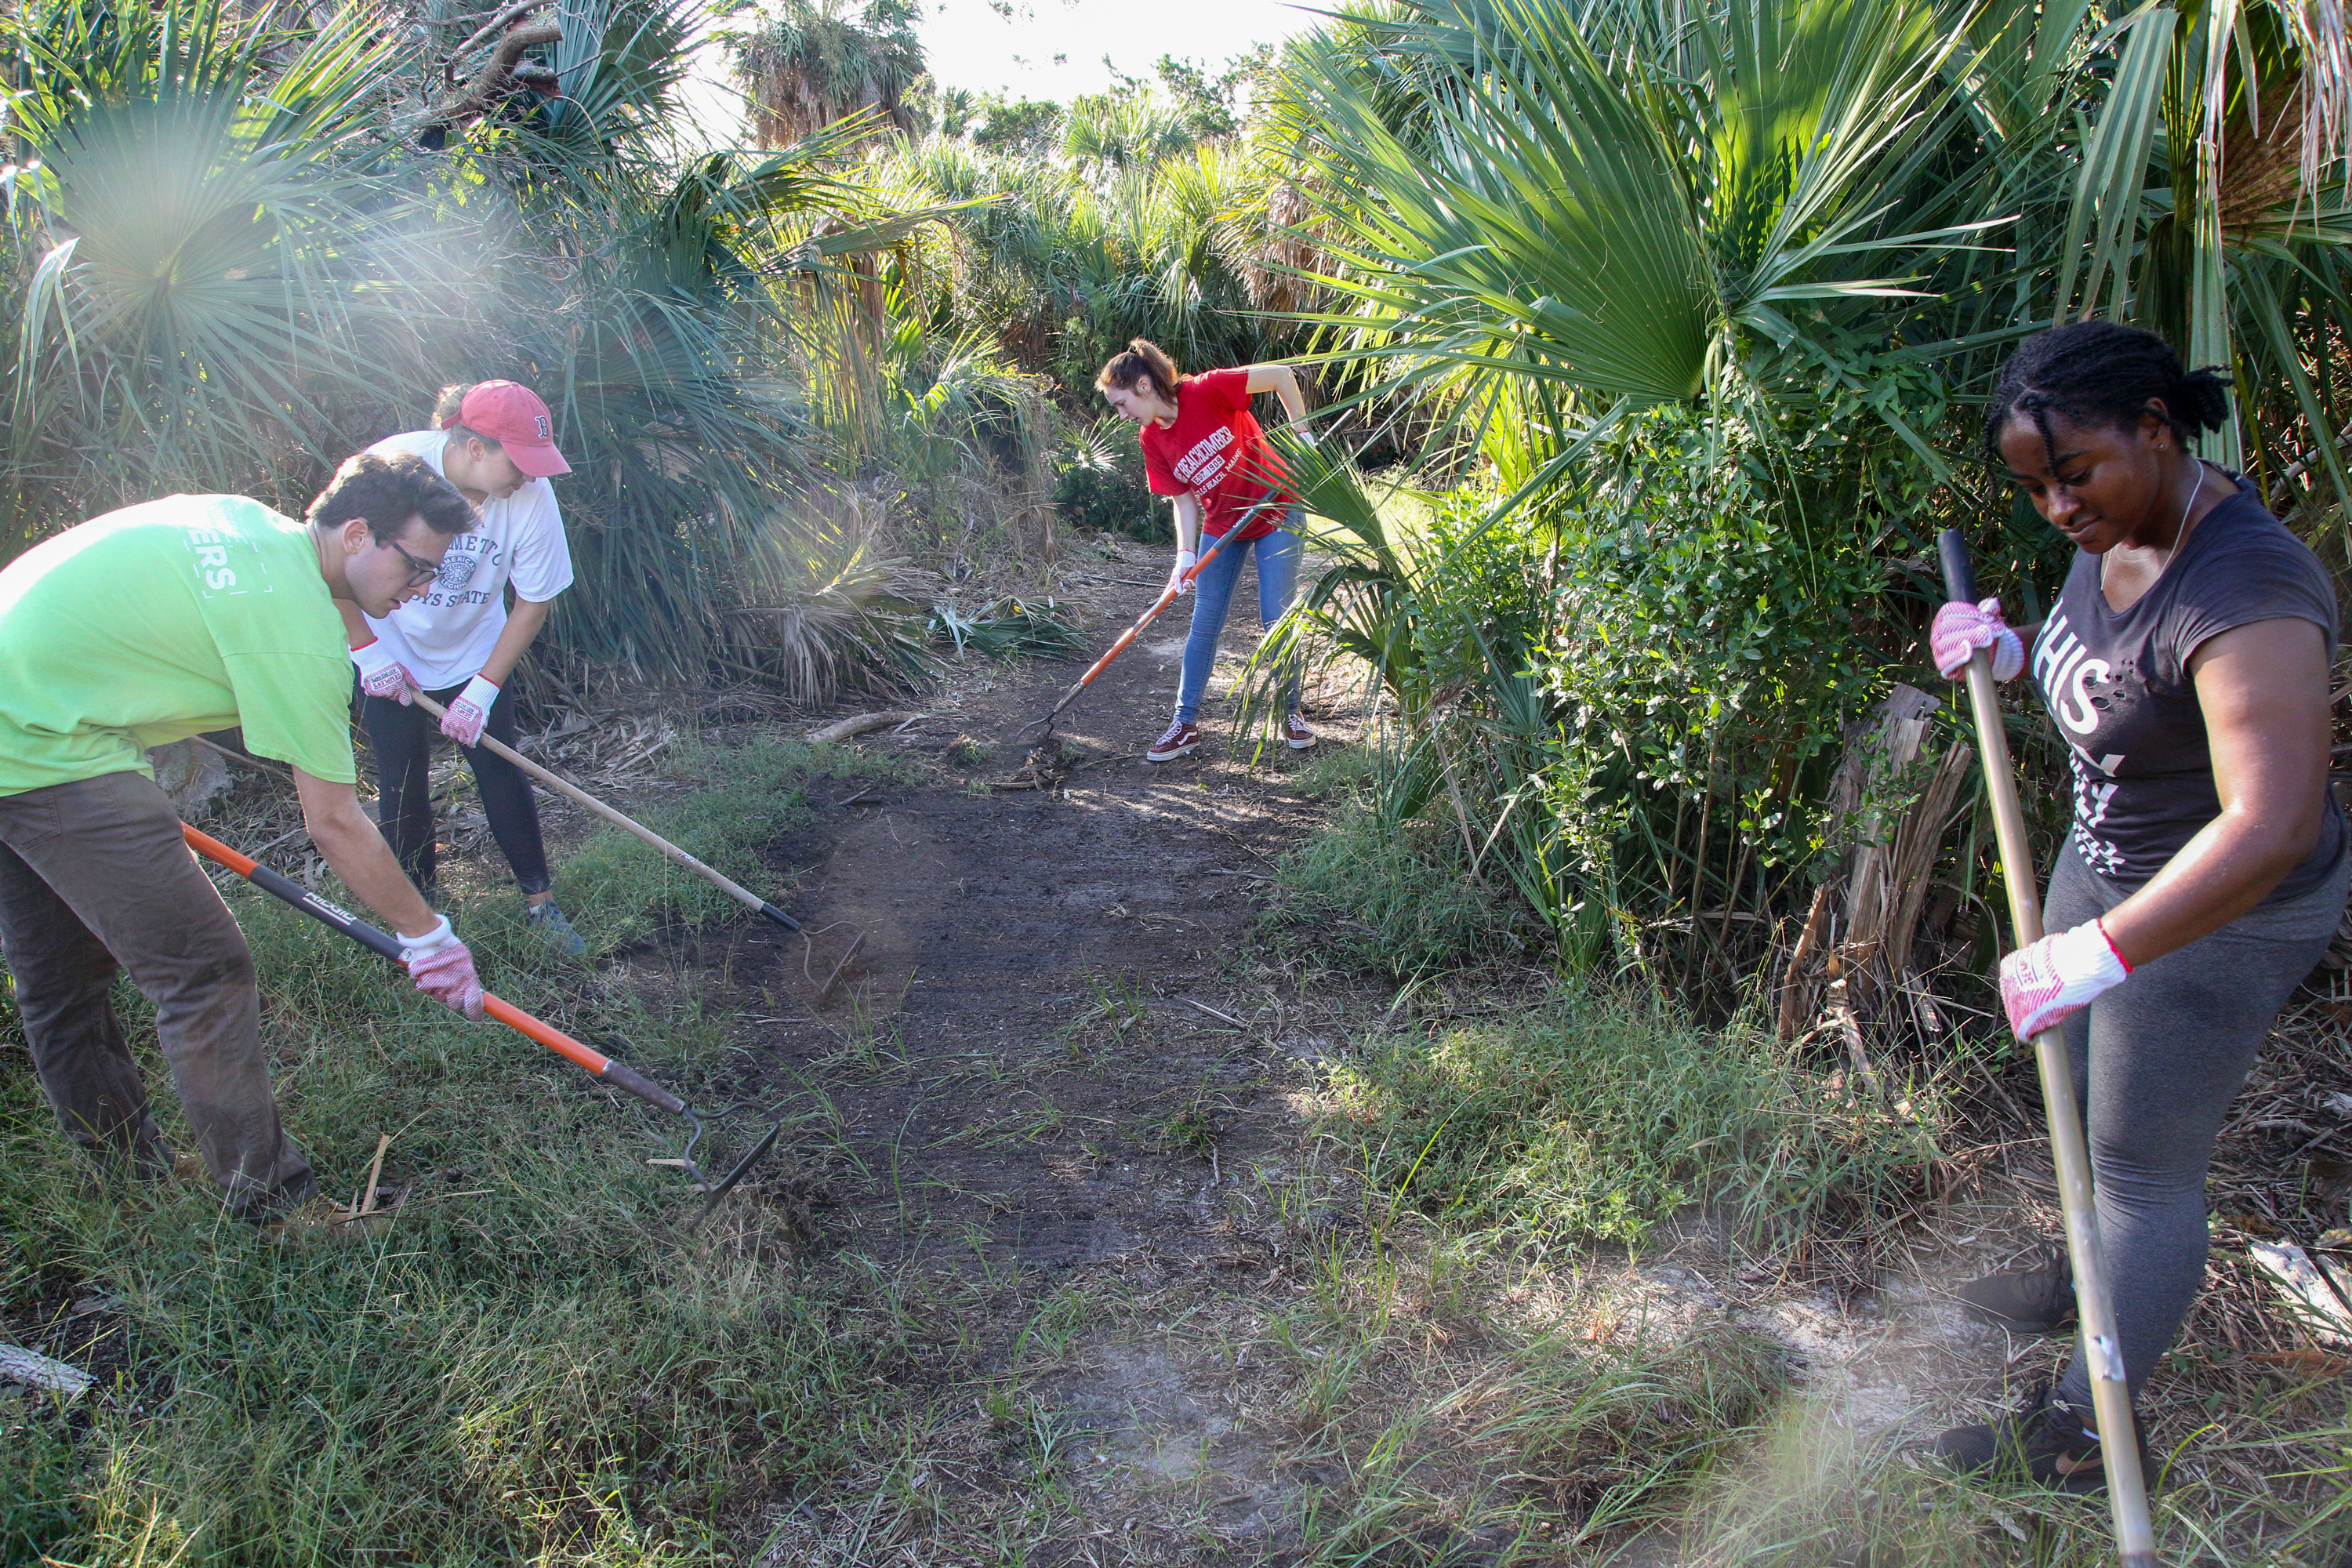 Four young people rake an area along a trail surrounded by green vegetation.